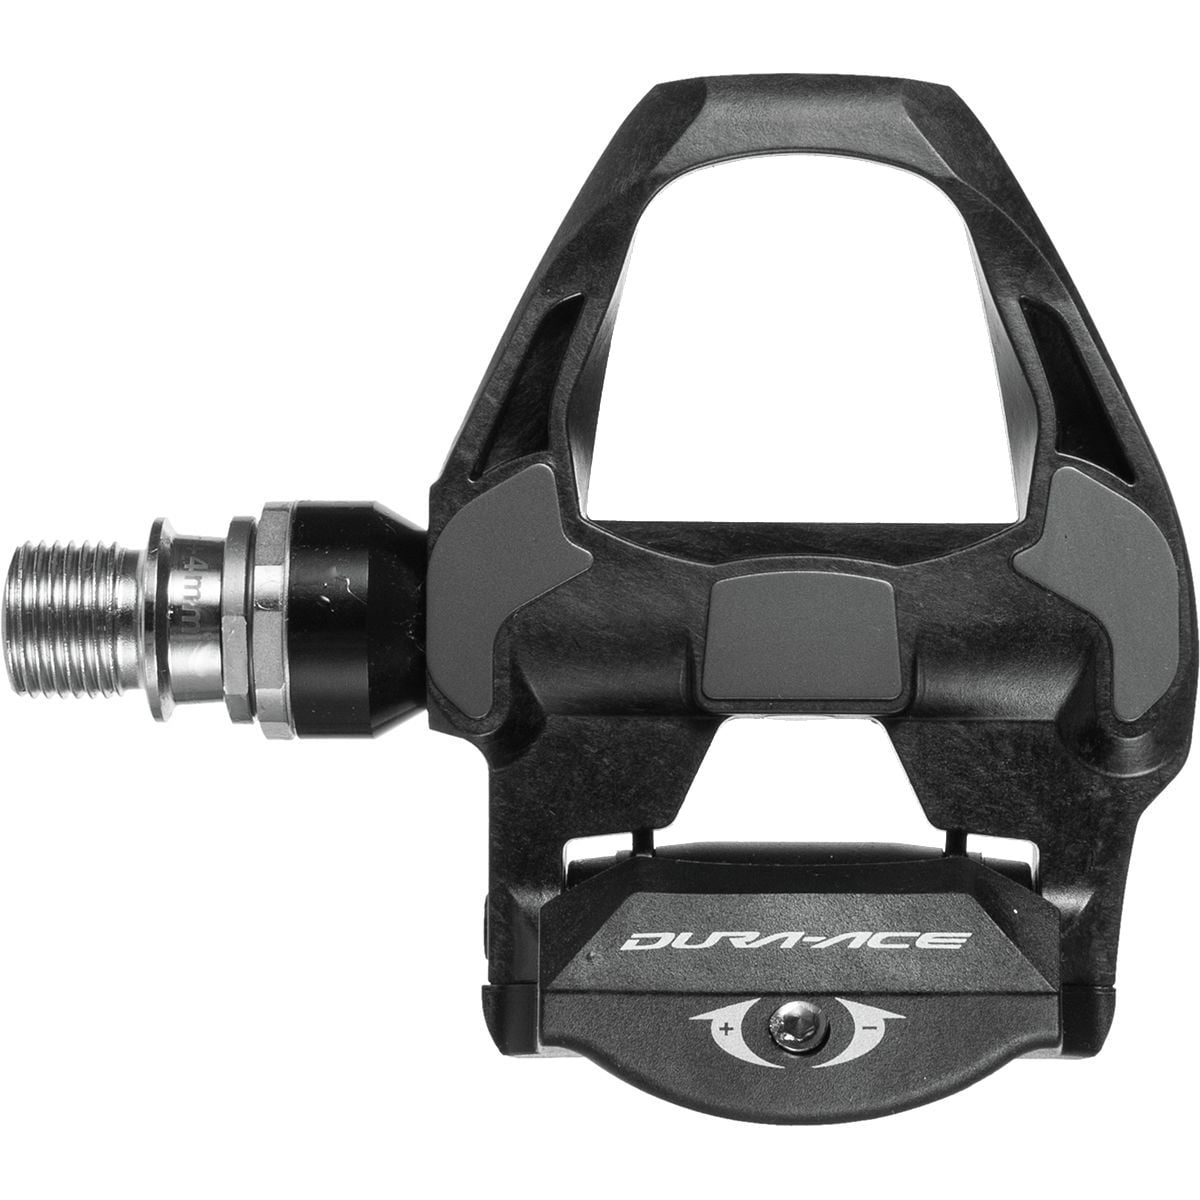 Shimano Dura Ace PD R9100 +4mm SPD SL Pedals